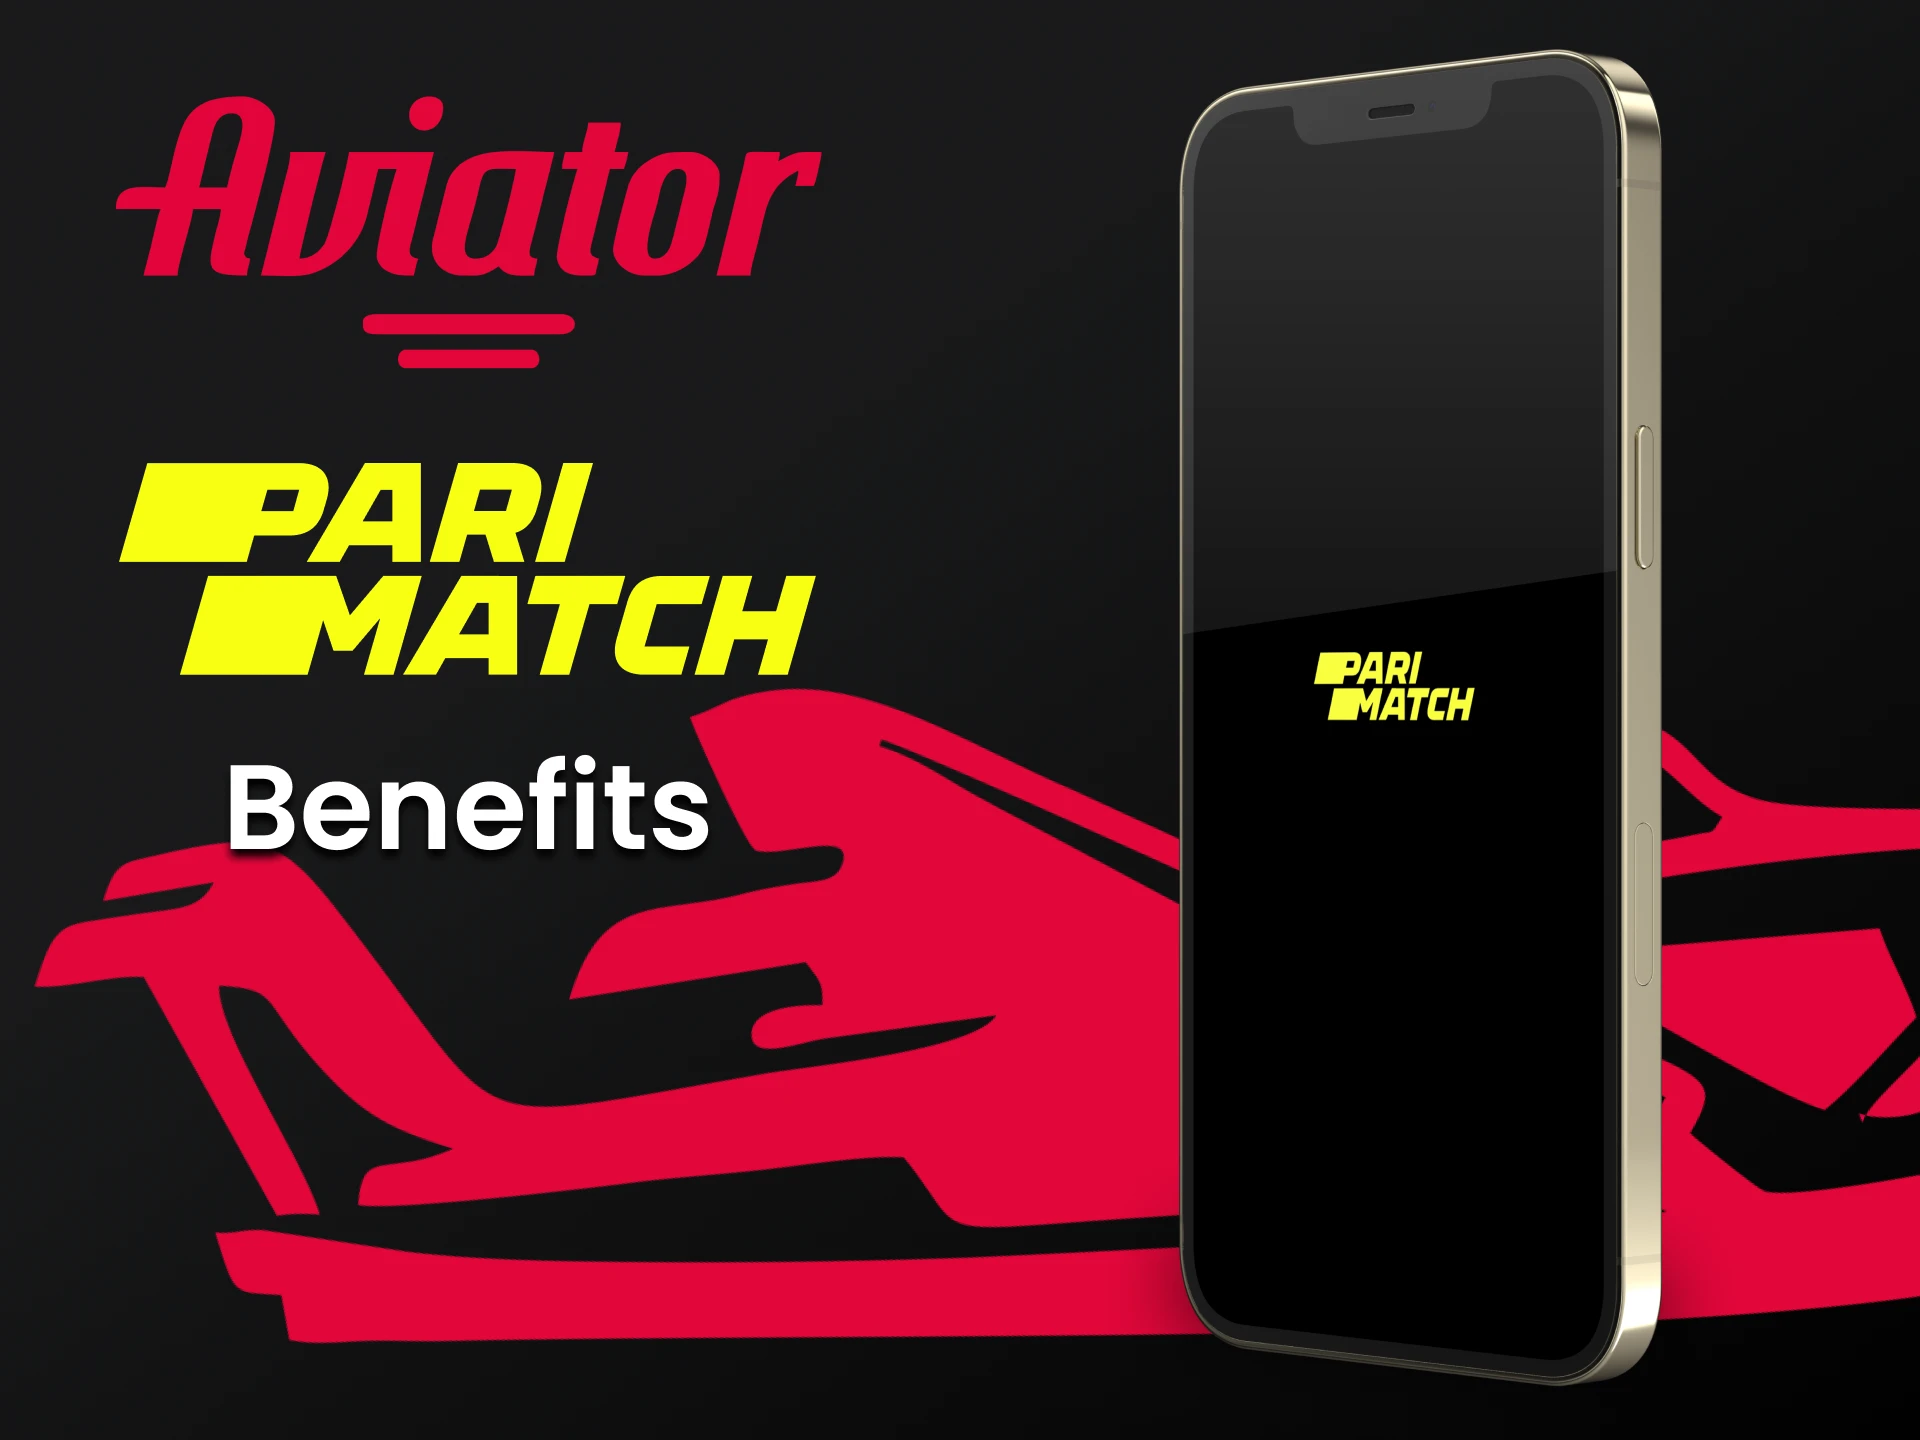 Parimatch is the right choice for playing Aviator.